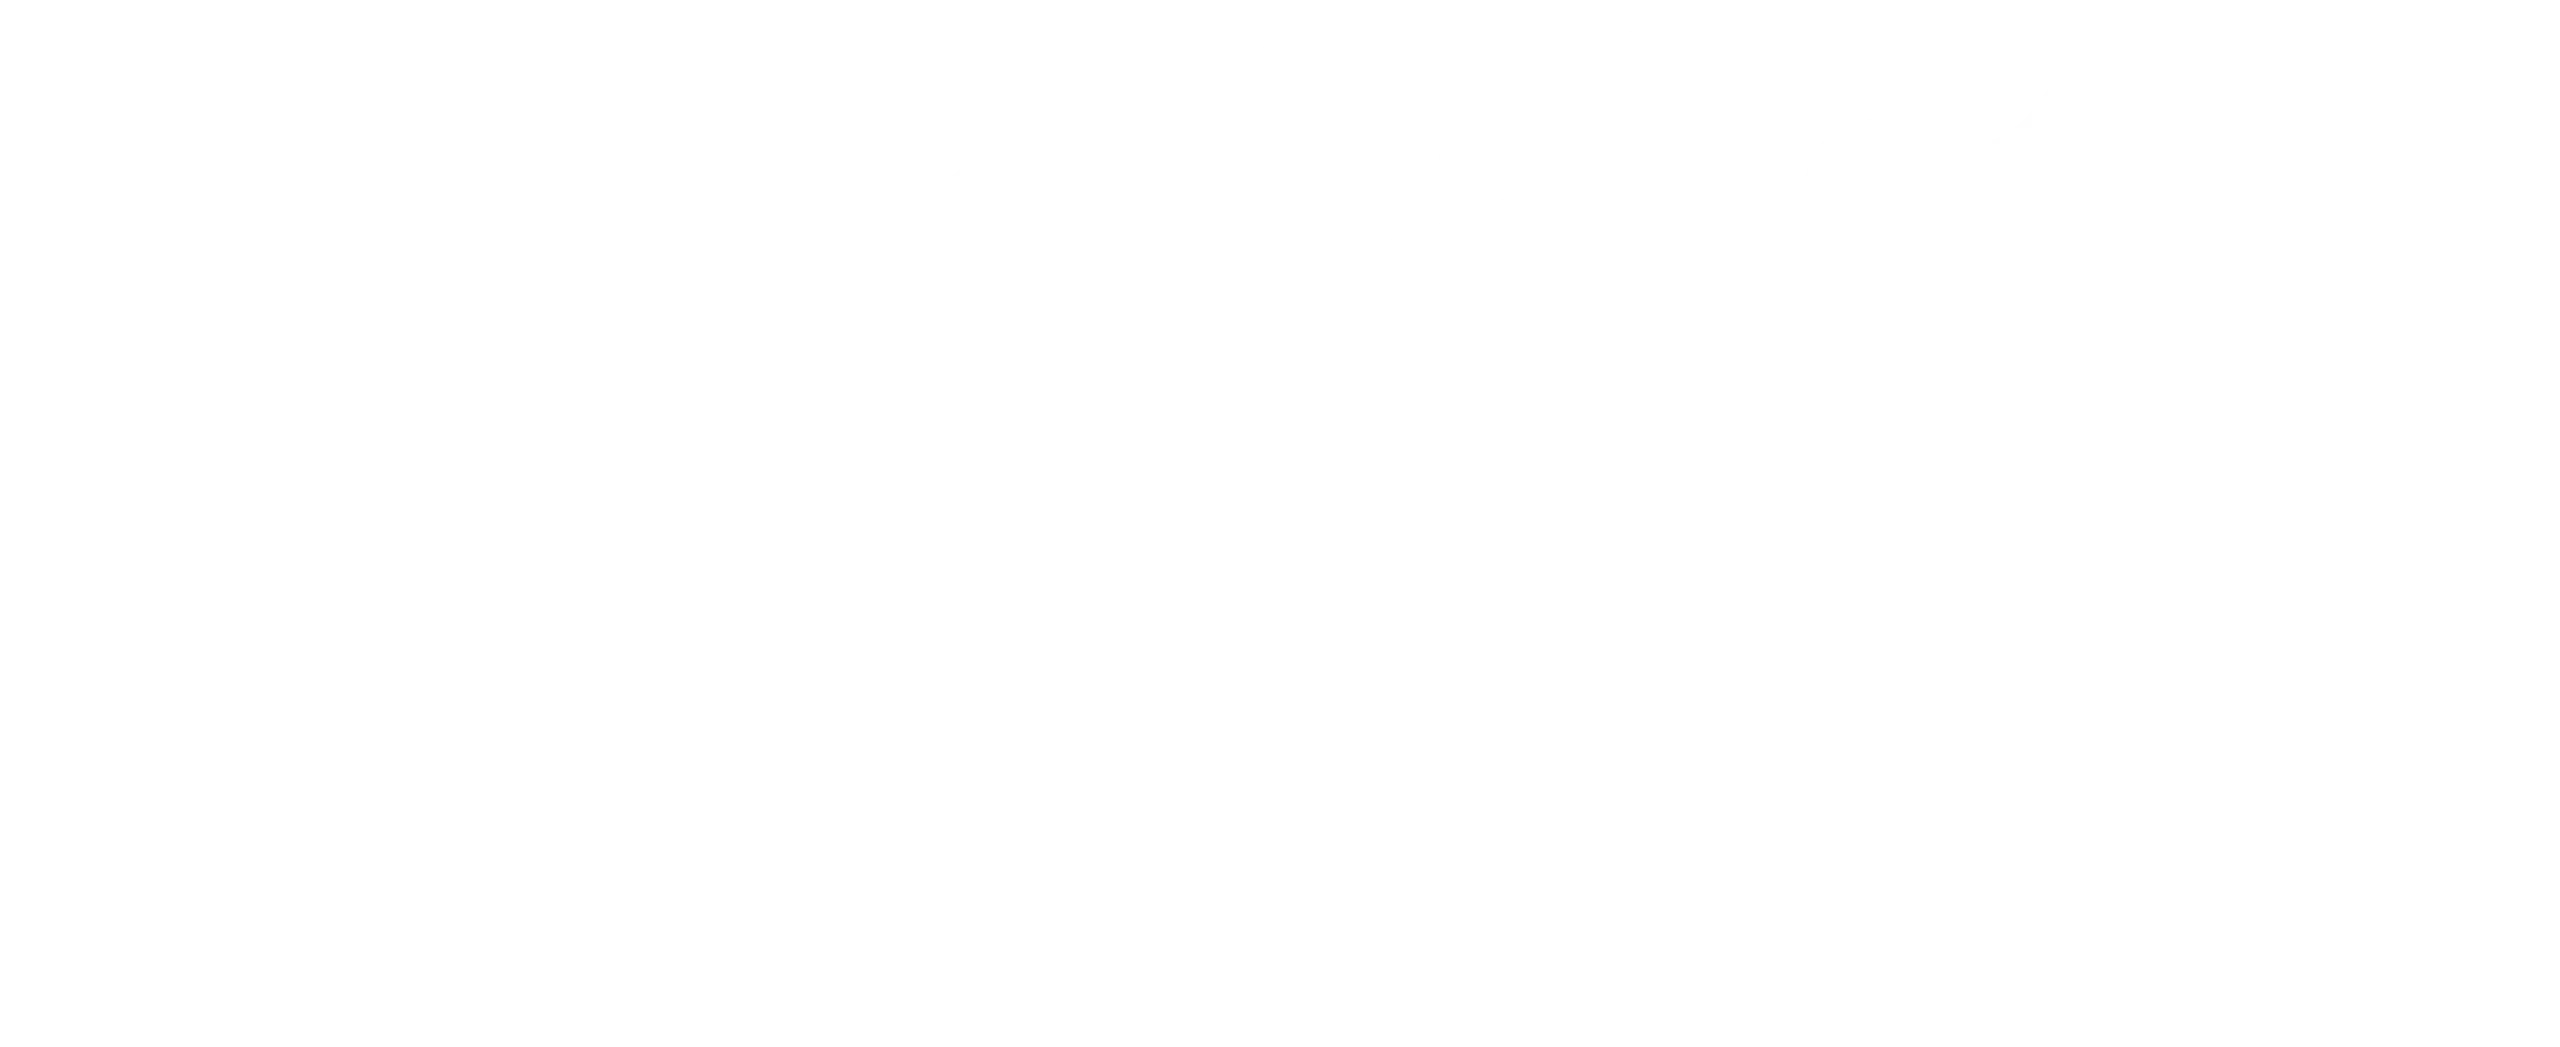 Cabot, Cabot and Forbes Logo